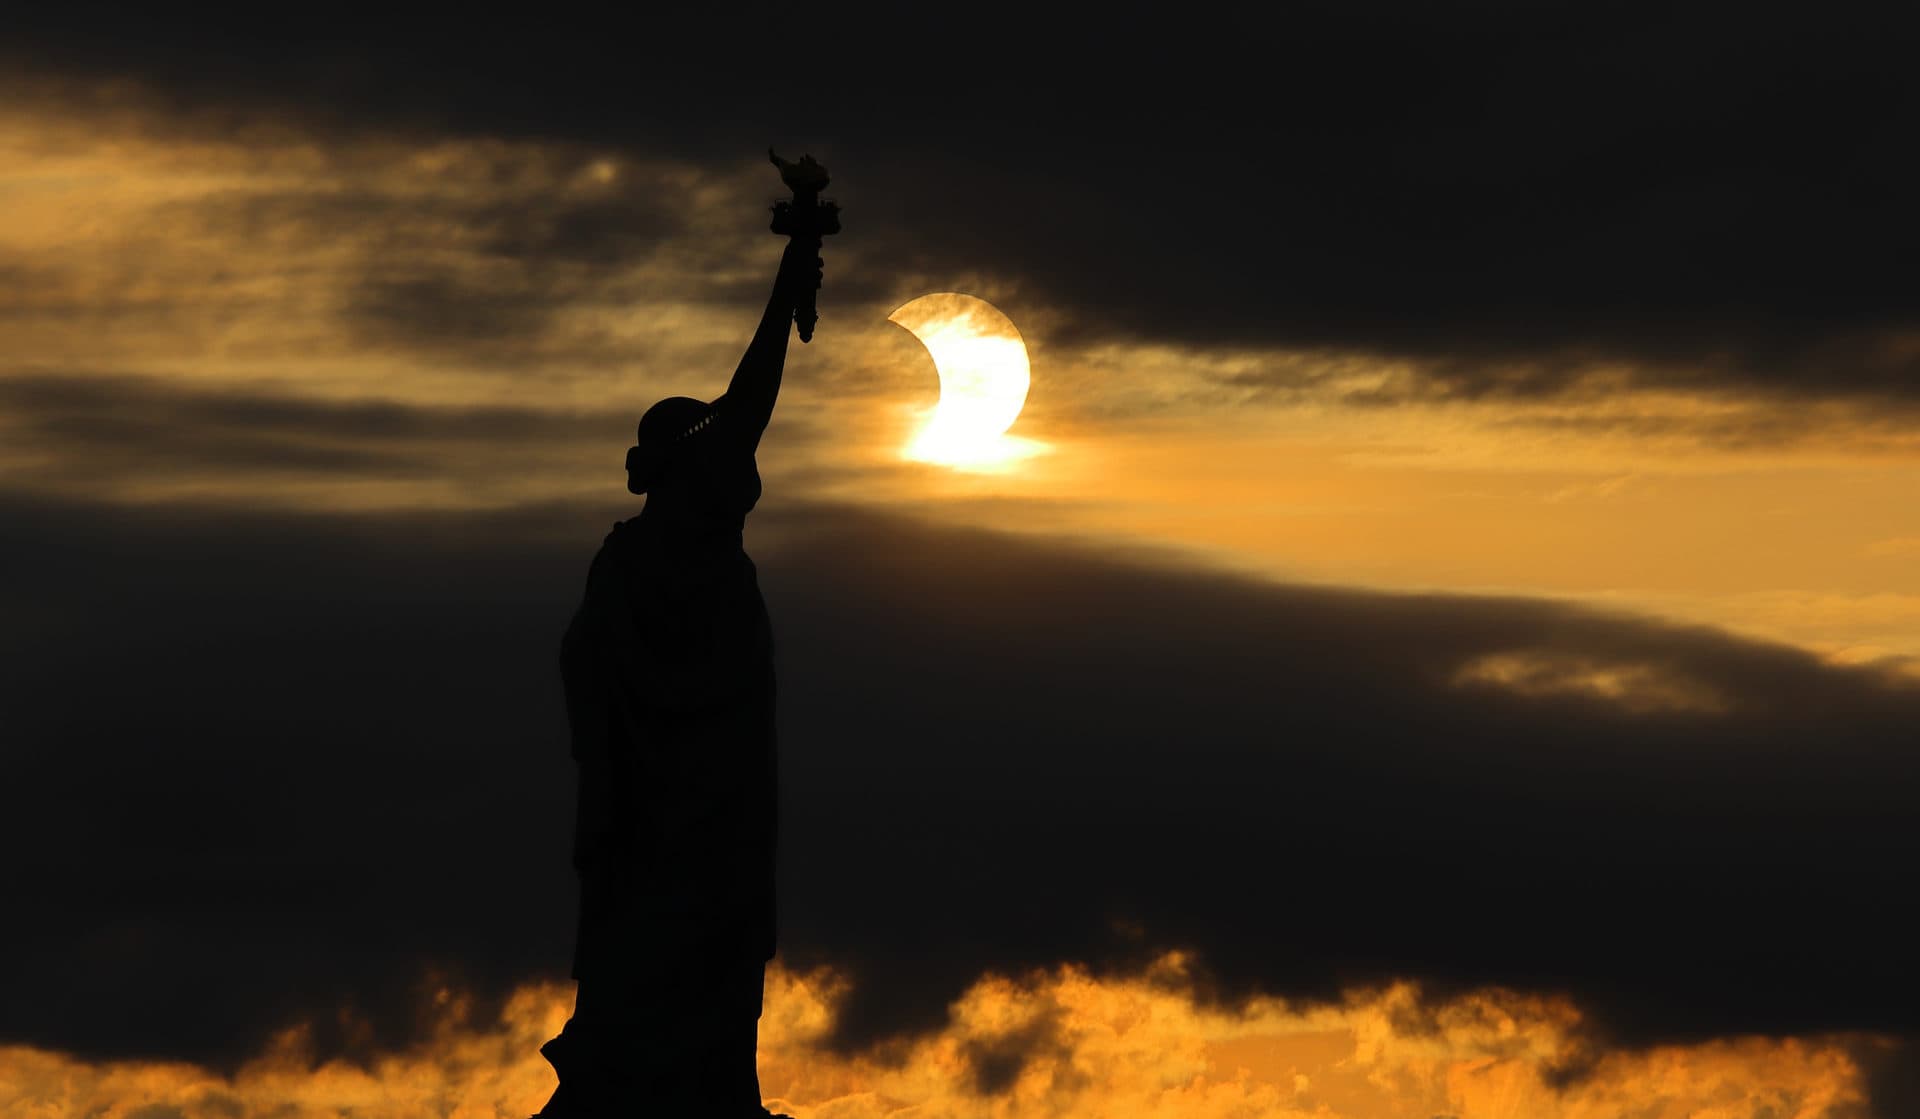 The sun rises next to the Statue of Liberty during an annular eclipse on Thursday in New York City. (Gary Hershorn/Getty Images)